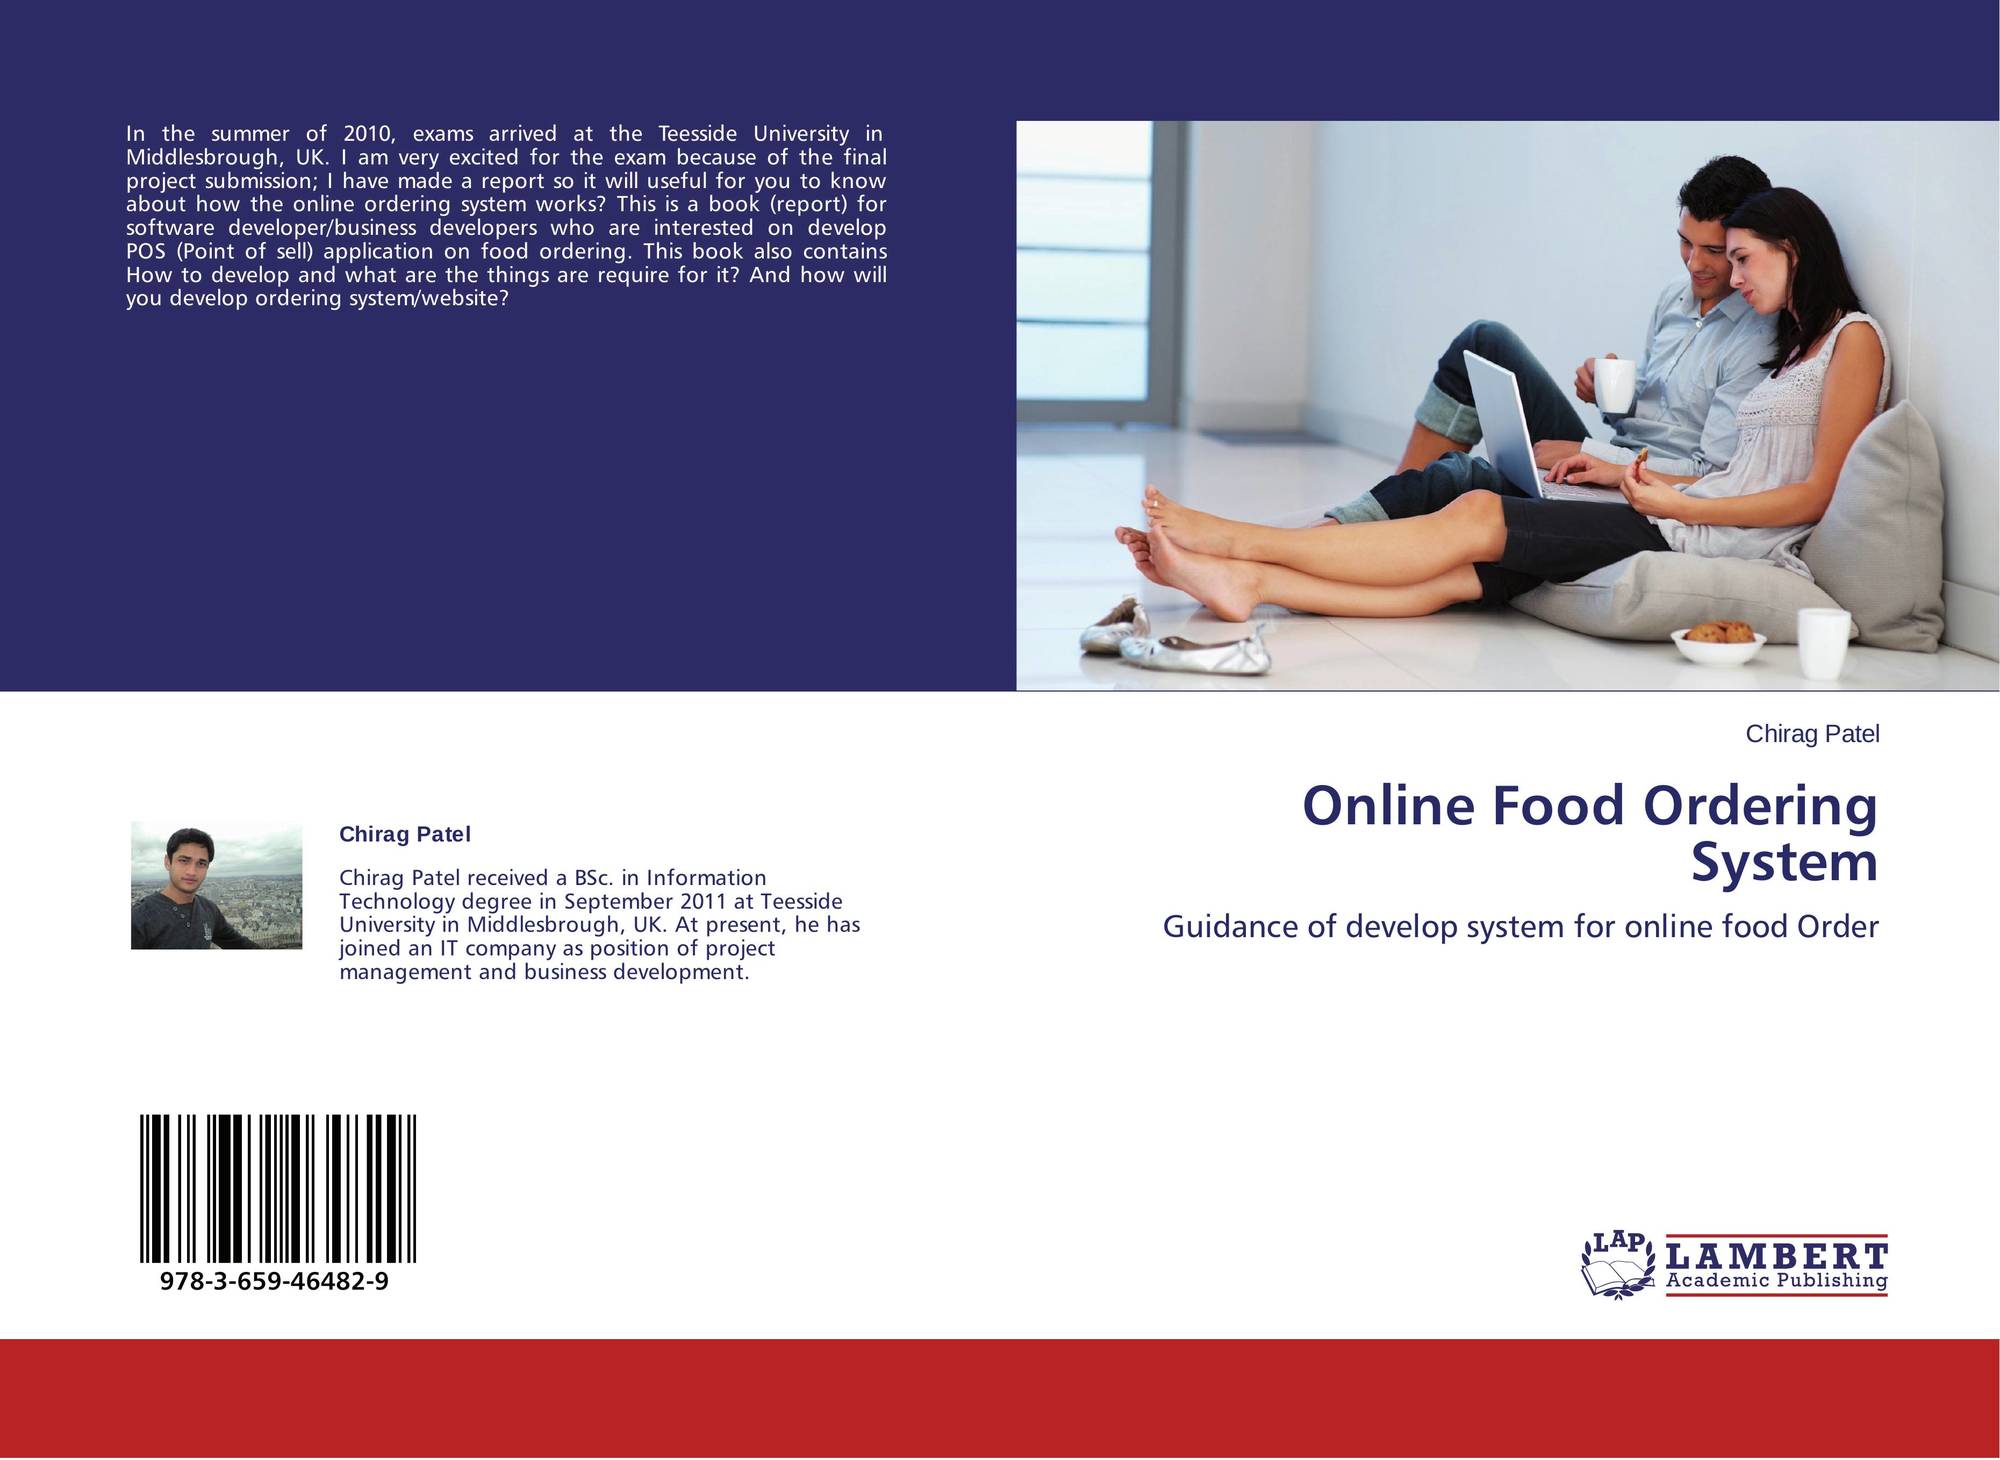 literature review on online food ordering system pdf